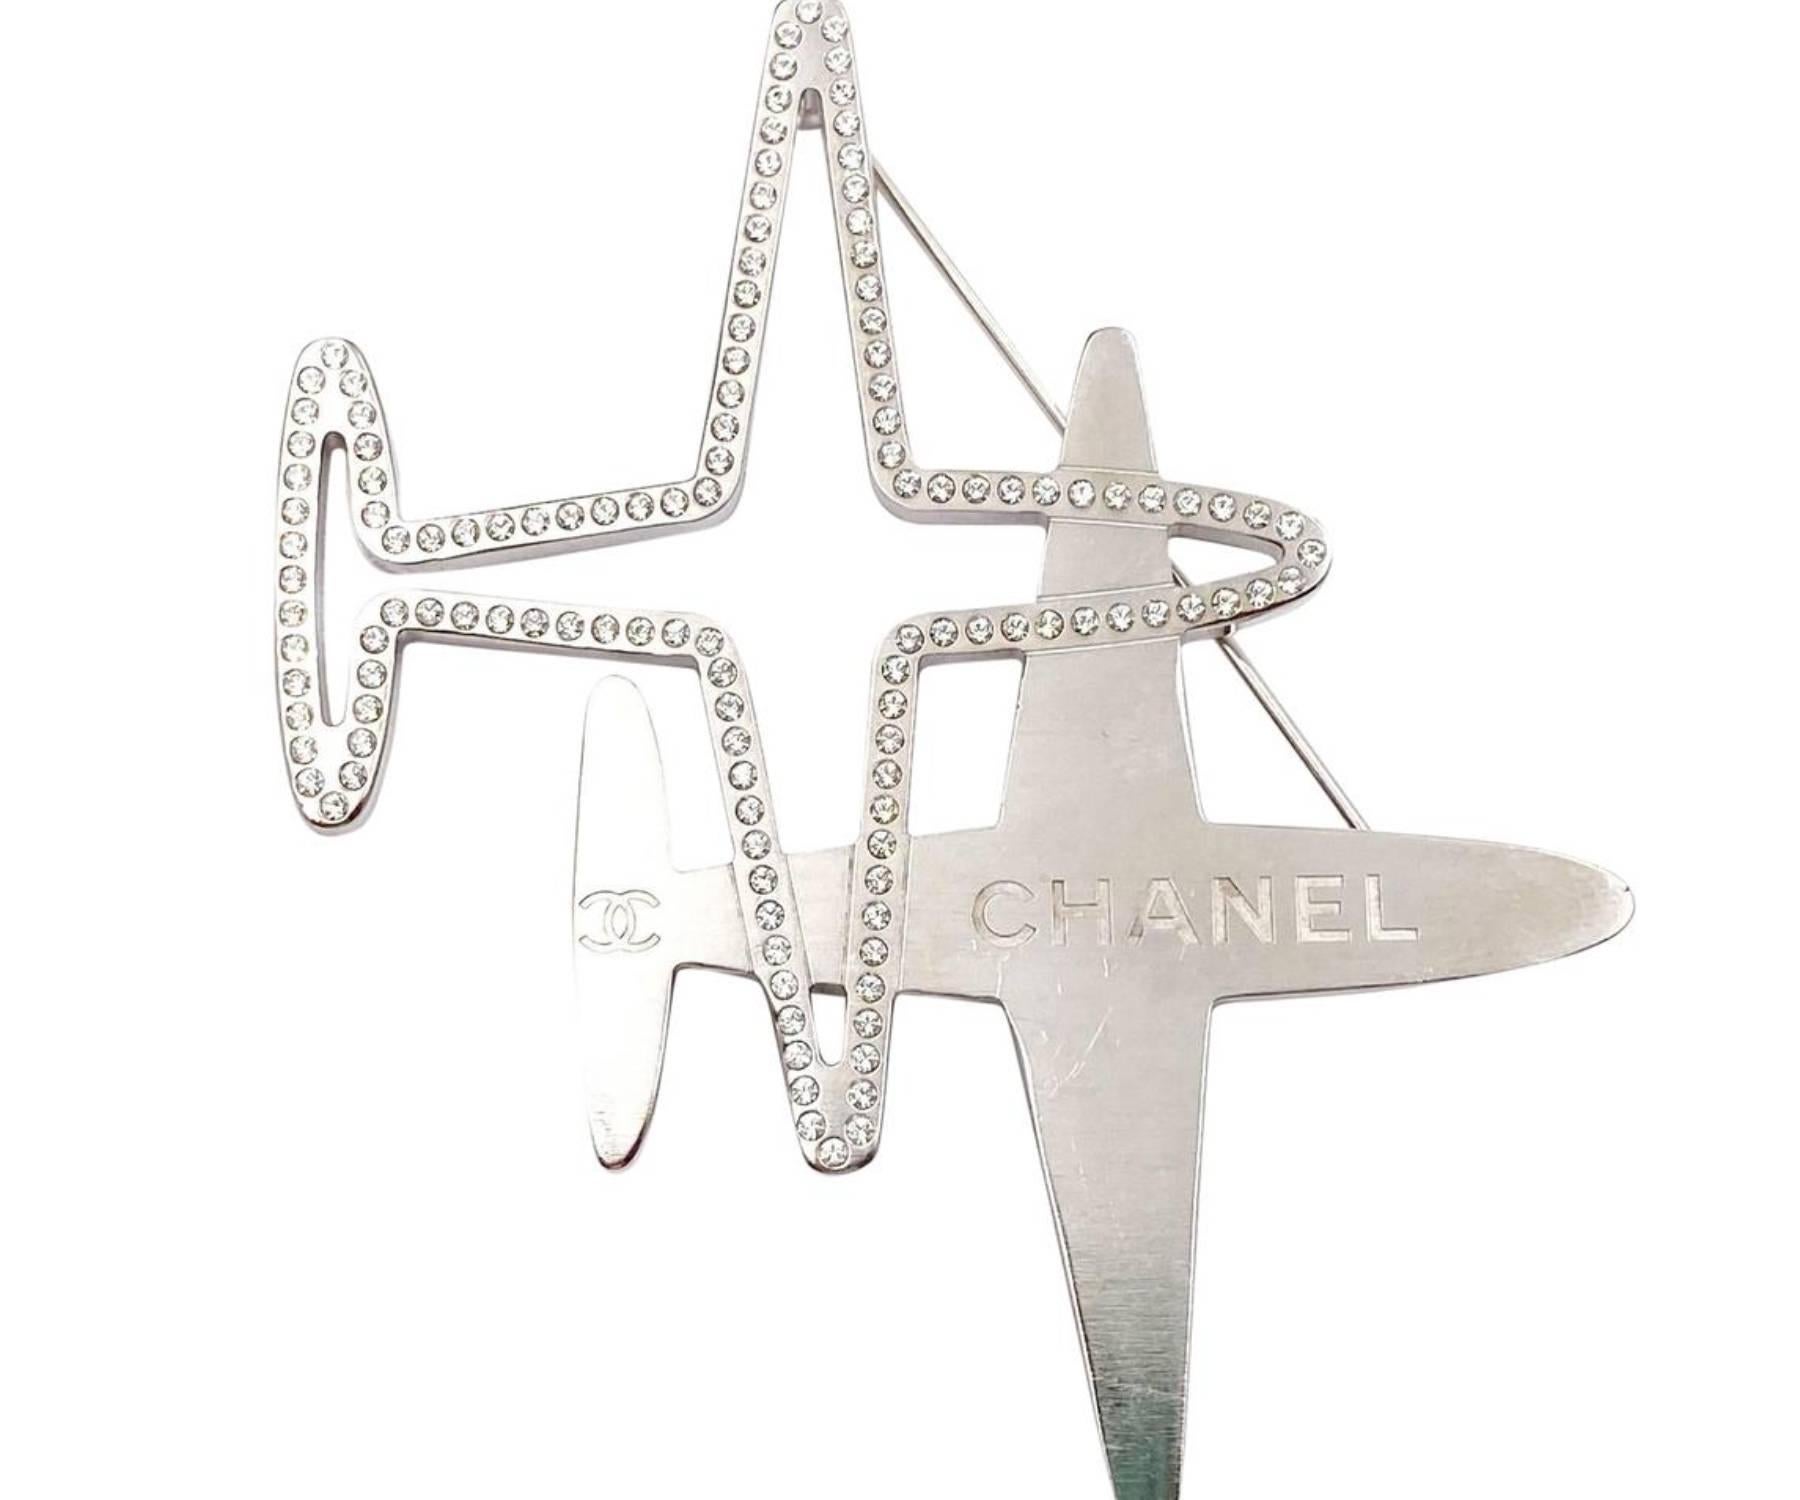 Chanel Silver Double Plane Crystal CC Large Brooch

*Marked 16
*Made in France
*Comes with the original box

-It is approximately 3.25